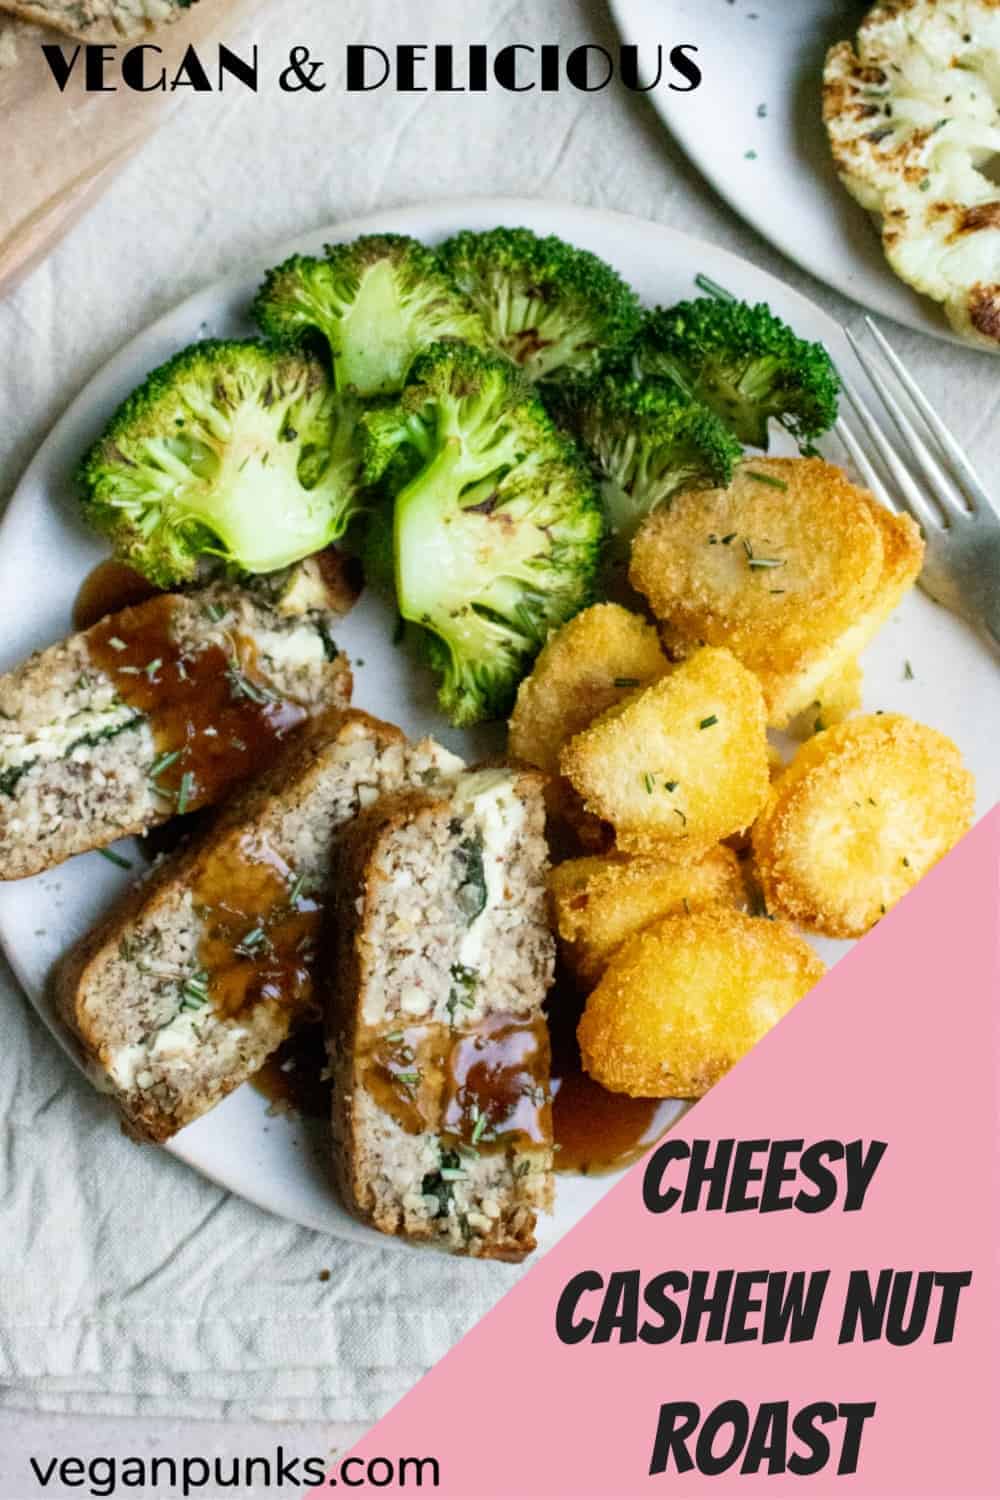 A Pinterest image titled Cheesy Cashew Nut Roast. The photo shows three slices of nut roast laying on a plate with a drizzle of gravy covering them. The slices have a cheesy spinach layer running through the middle. The plate also has roast potatoes and broccoli on it.